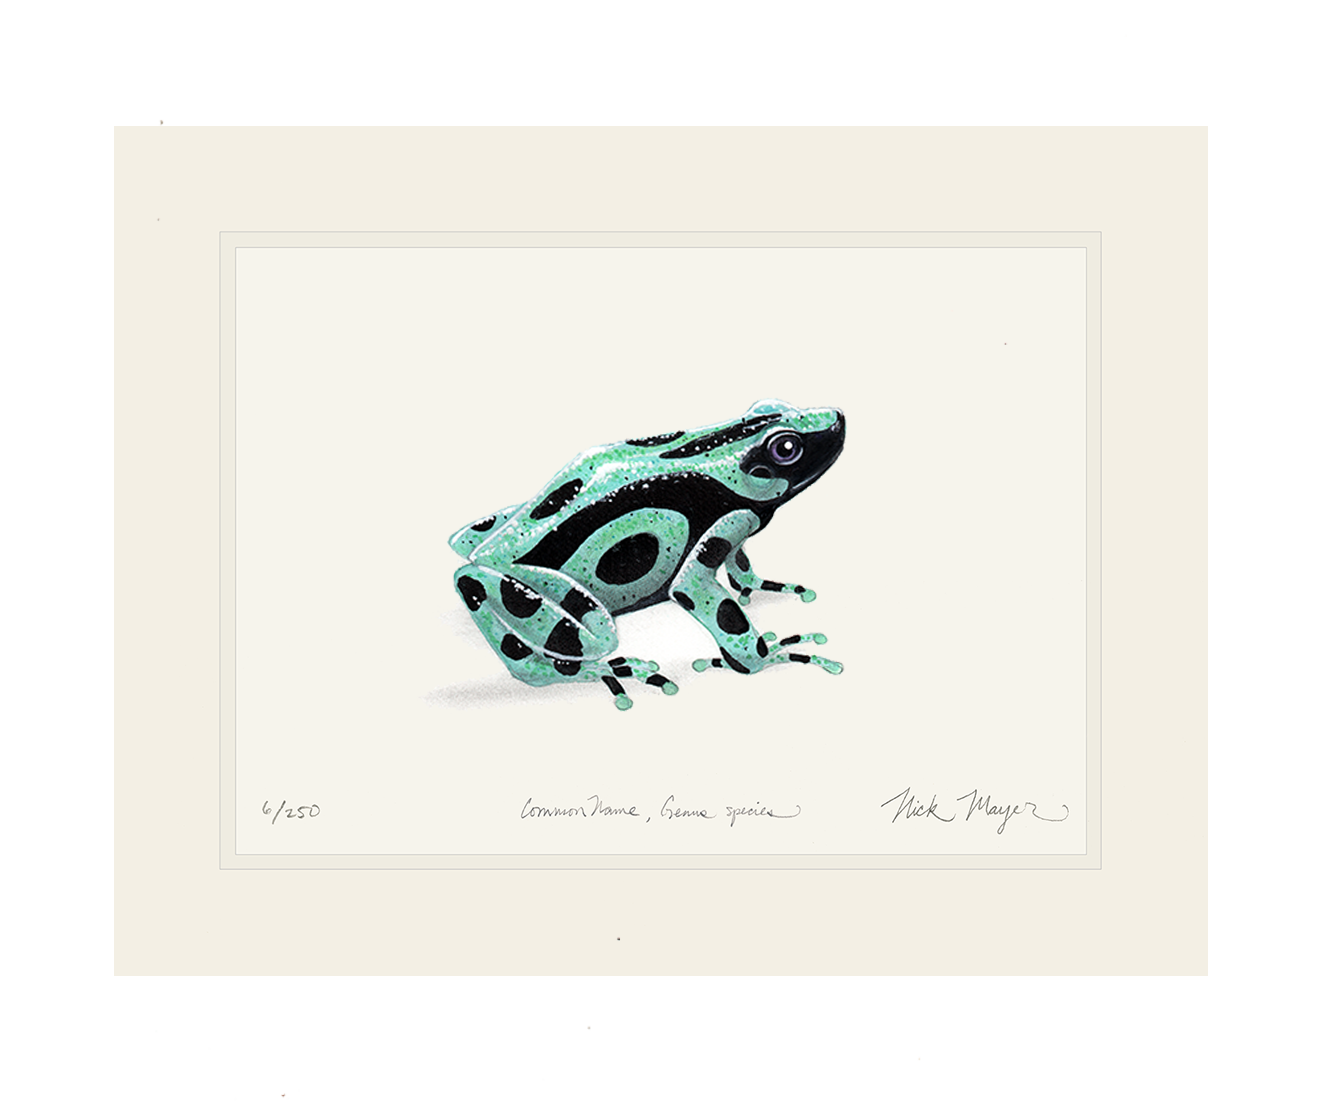 Green and Black Poison Dart Frog Print